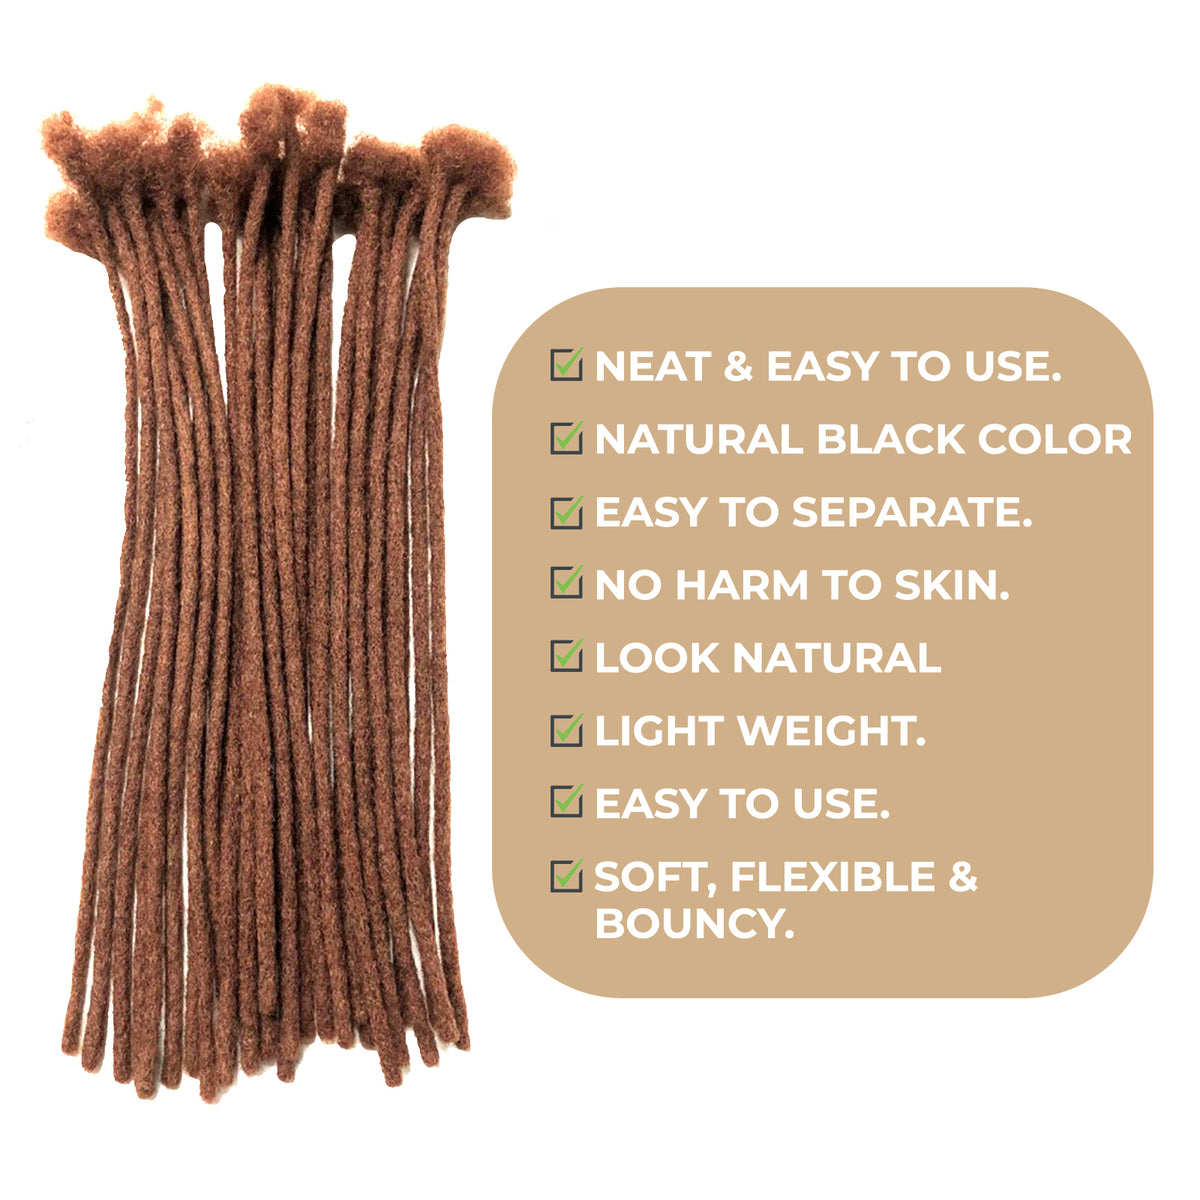 100% Human Hair Dreadlock Extensions 16Inch 10 Strands Handmade Natural Loc Extensions Human Hair Bundle Dreads Extensions For Woman & Men Can Be Dyed/Bleached (Brown/33, 16inch length 0.4 cm Width)